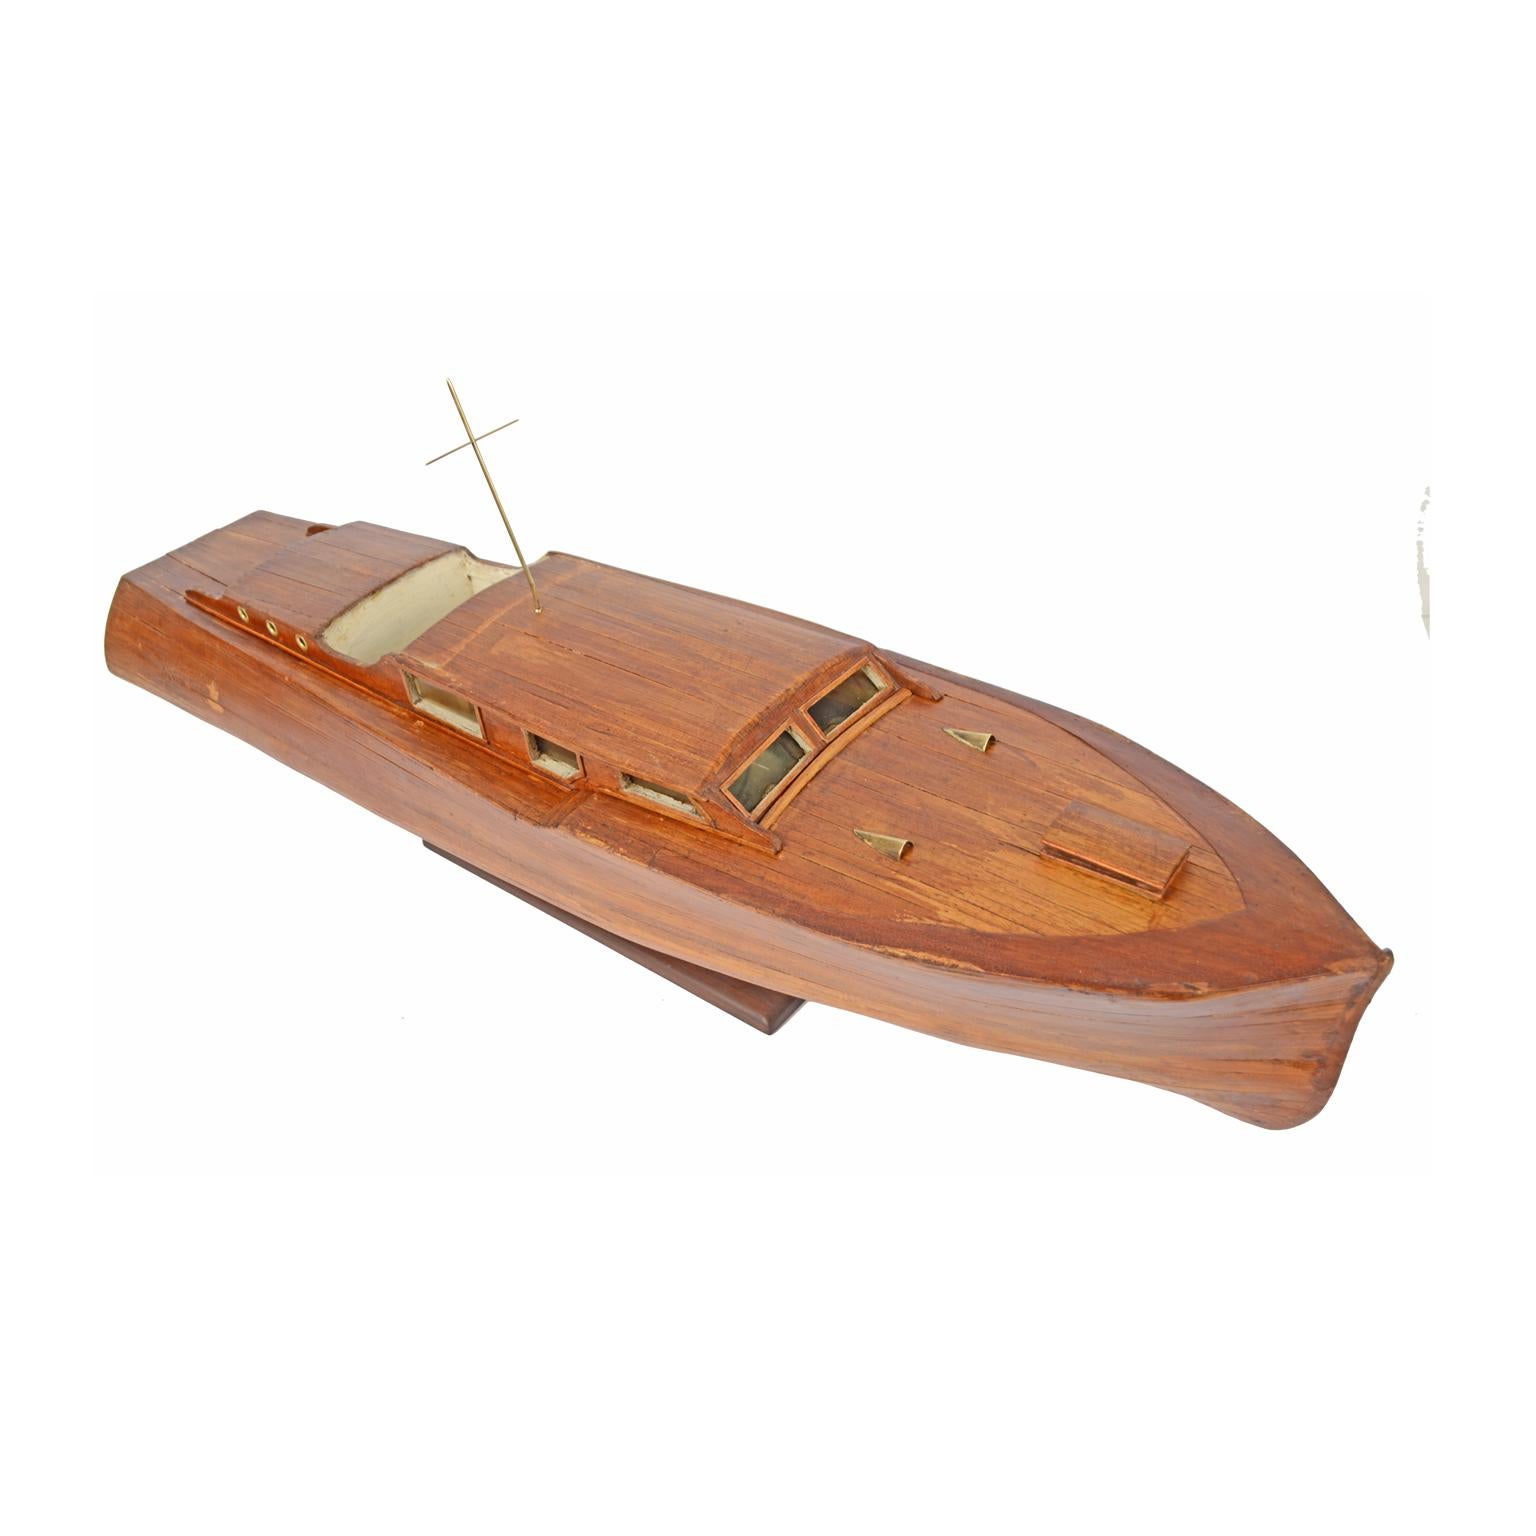 Scale model of an English motor yacht from the 1930s, oak planking hull. Measures: Length 98 cm - 38.58 inches, width 25 cm - 9.84 inches, height with base 25 cm - 9.84 inches. Good condition.